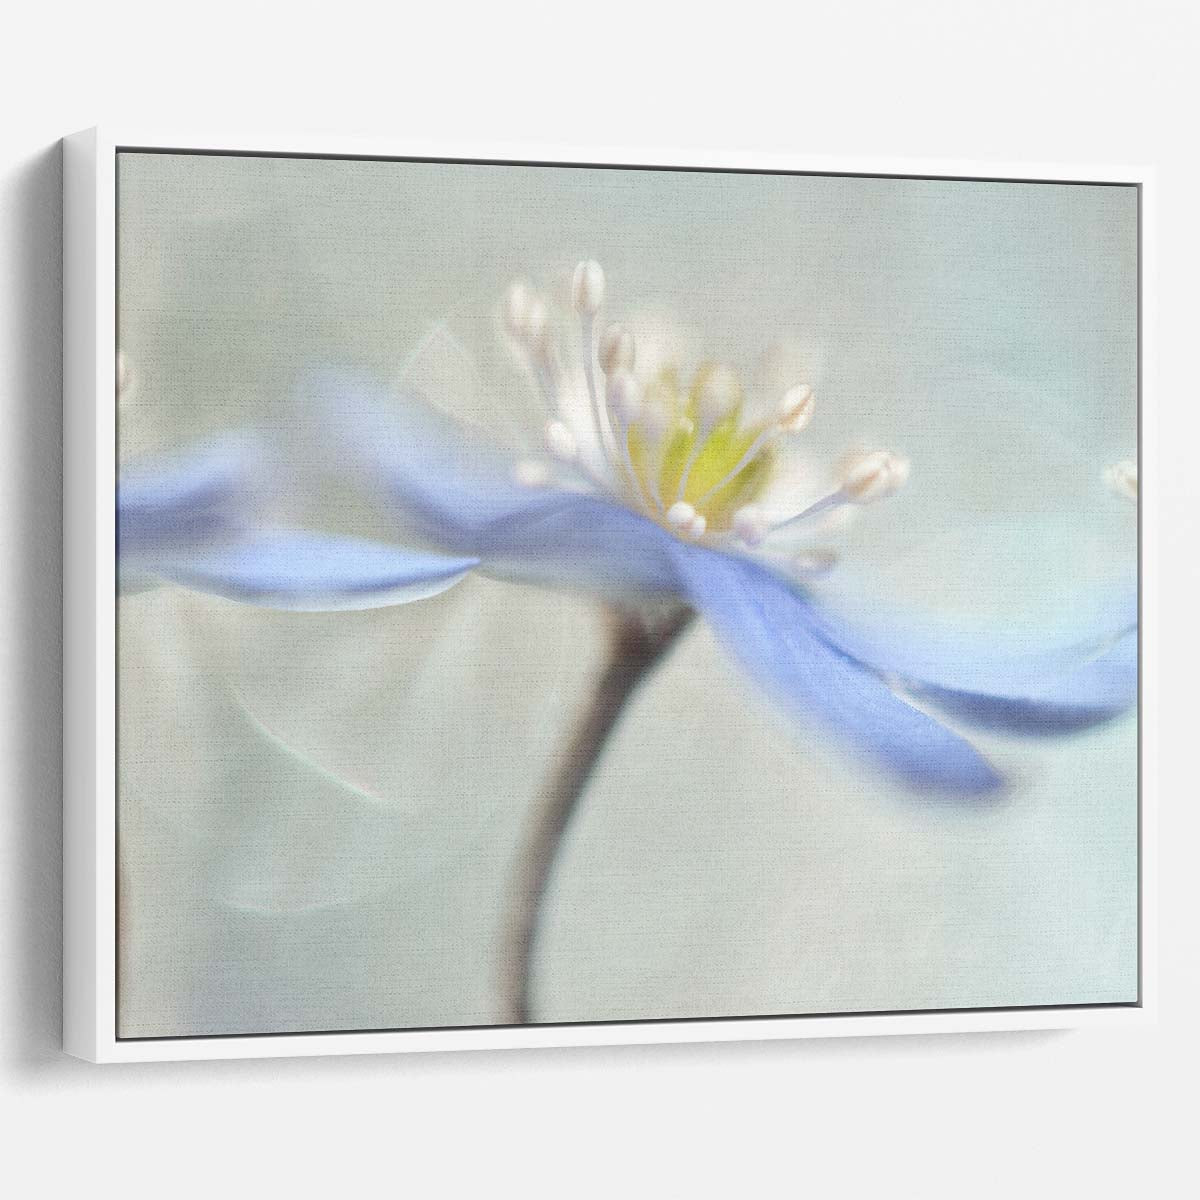 Delicate Summer Anemone Trio Macro Wall Art by Luxuriance Designs. Made in USA.